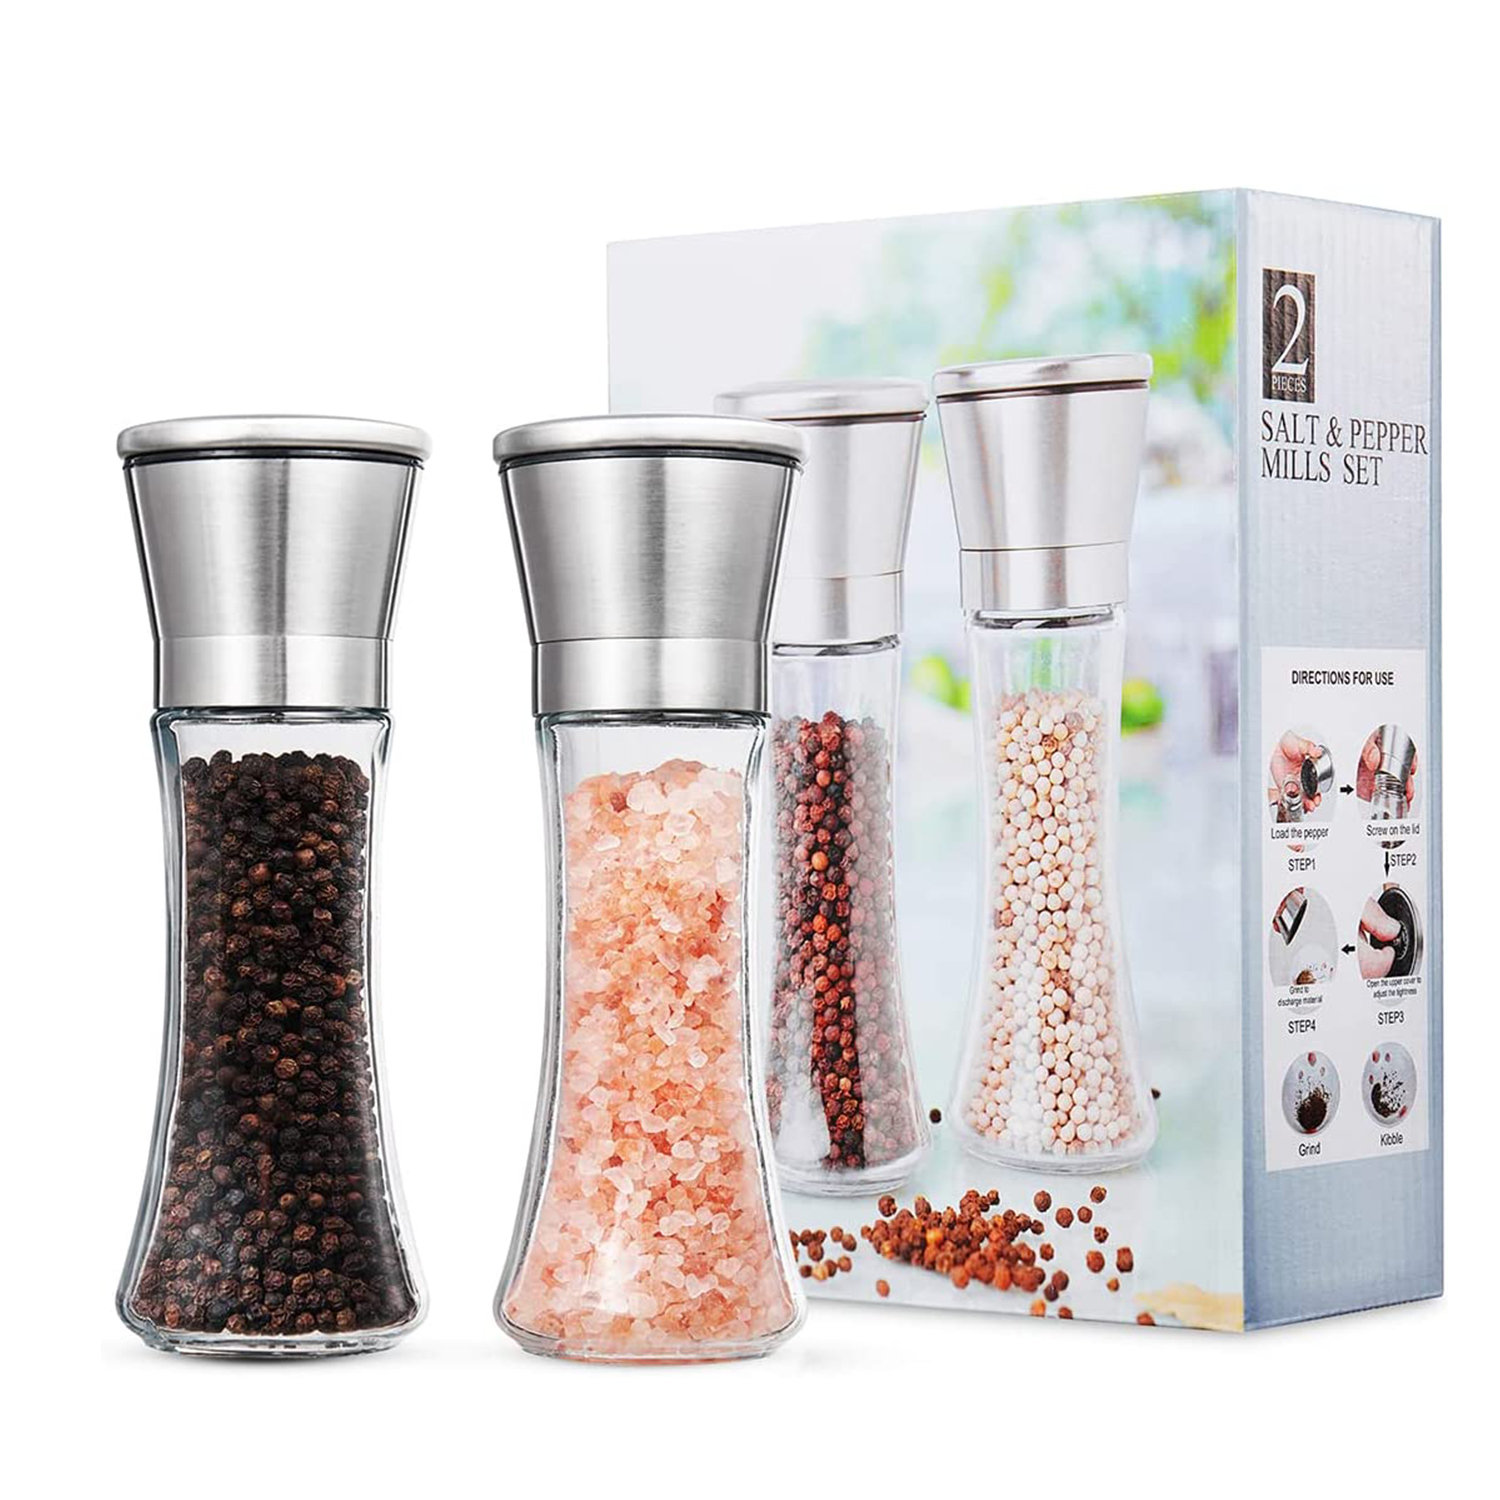 Salt and Pepper Grinder Set of 2 - Tall Salt and Pepper Shakers with Adjustable Coarseness by Ceramic Rotor - Stainless Steel Pepper Mill Shaker and